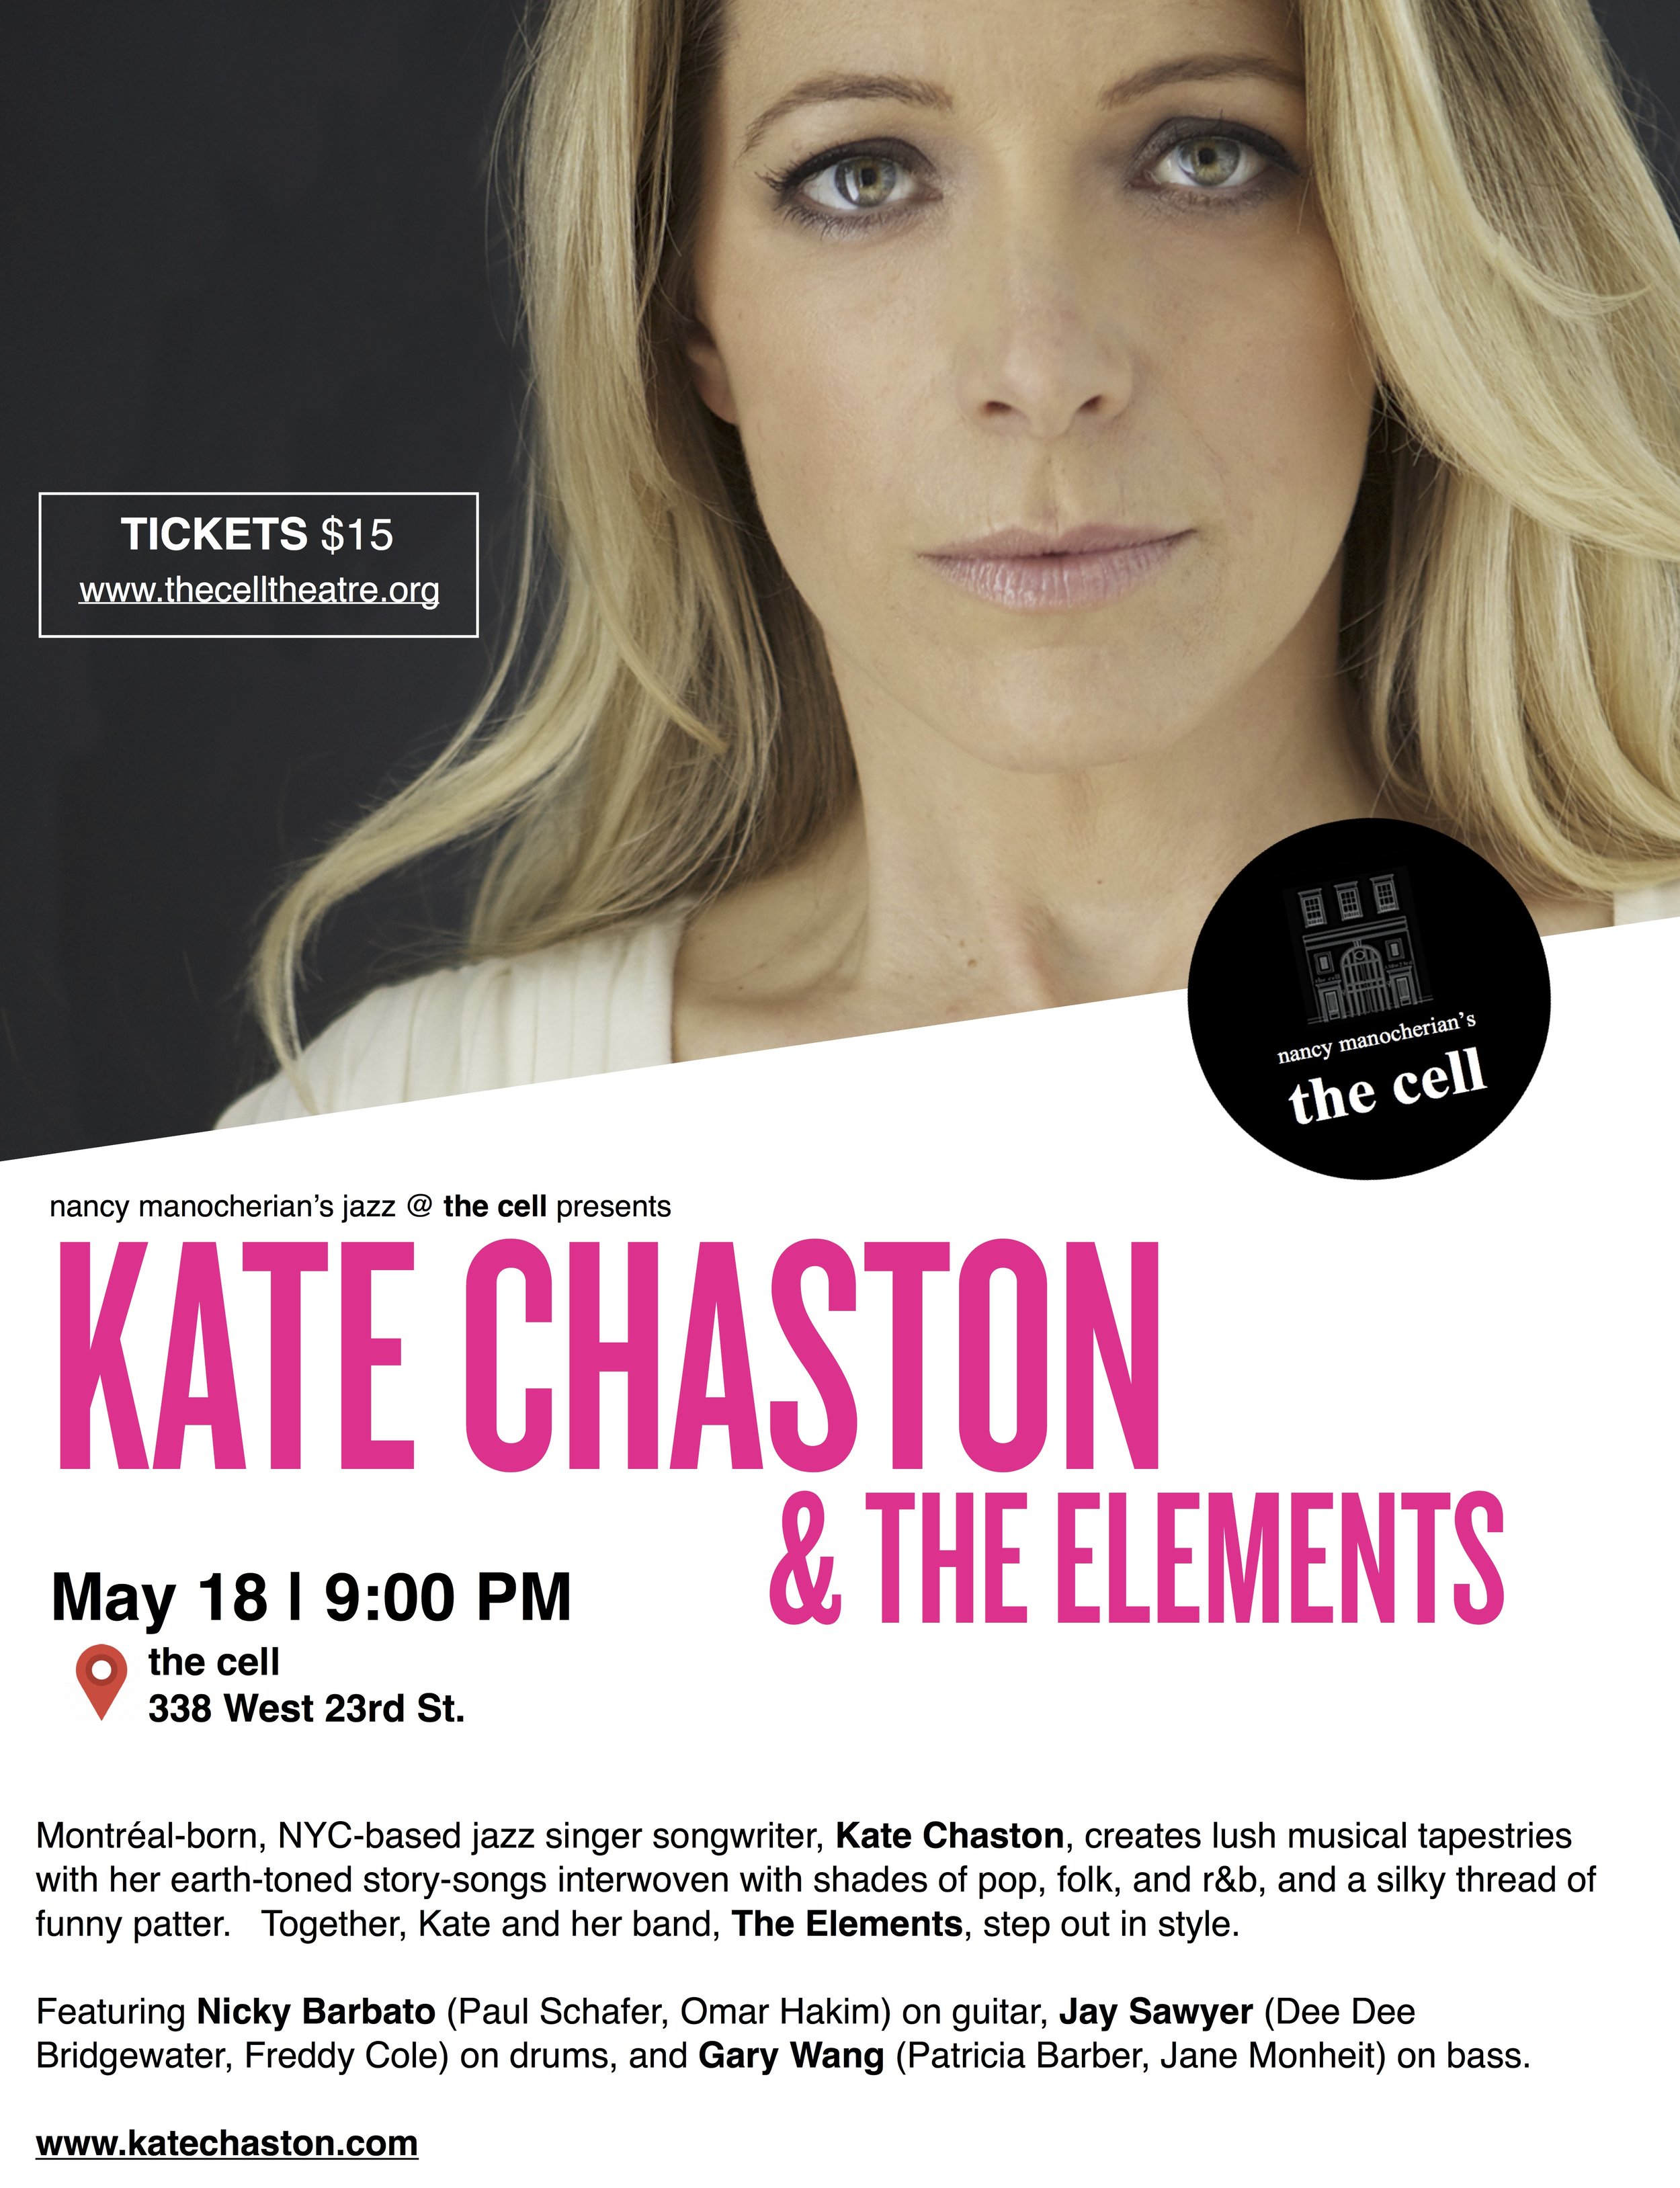 KATE CHASTON & THE ELEMENTS — the cell